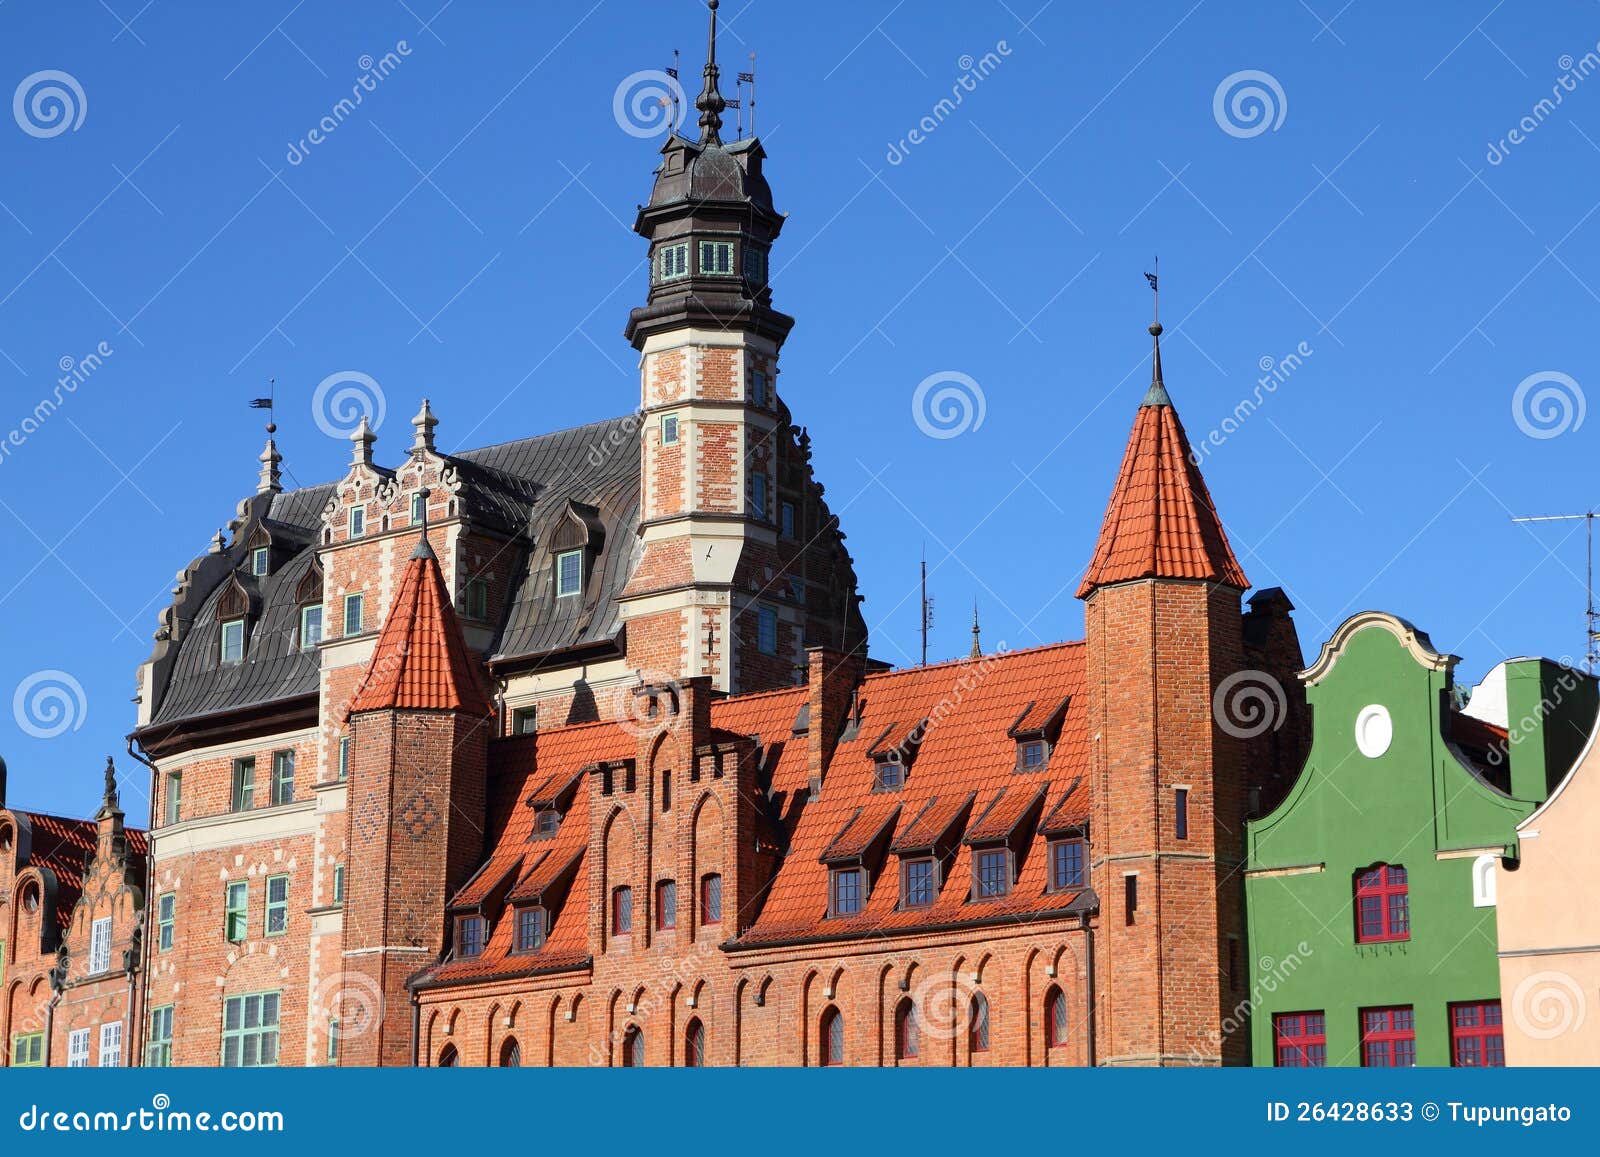 Poland - Gdansk city (also know nas Danzig) in Pomerania region. The Old Town.